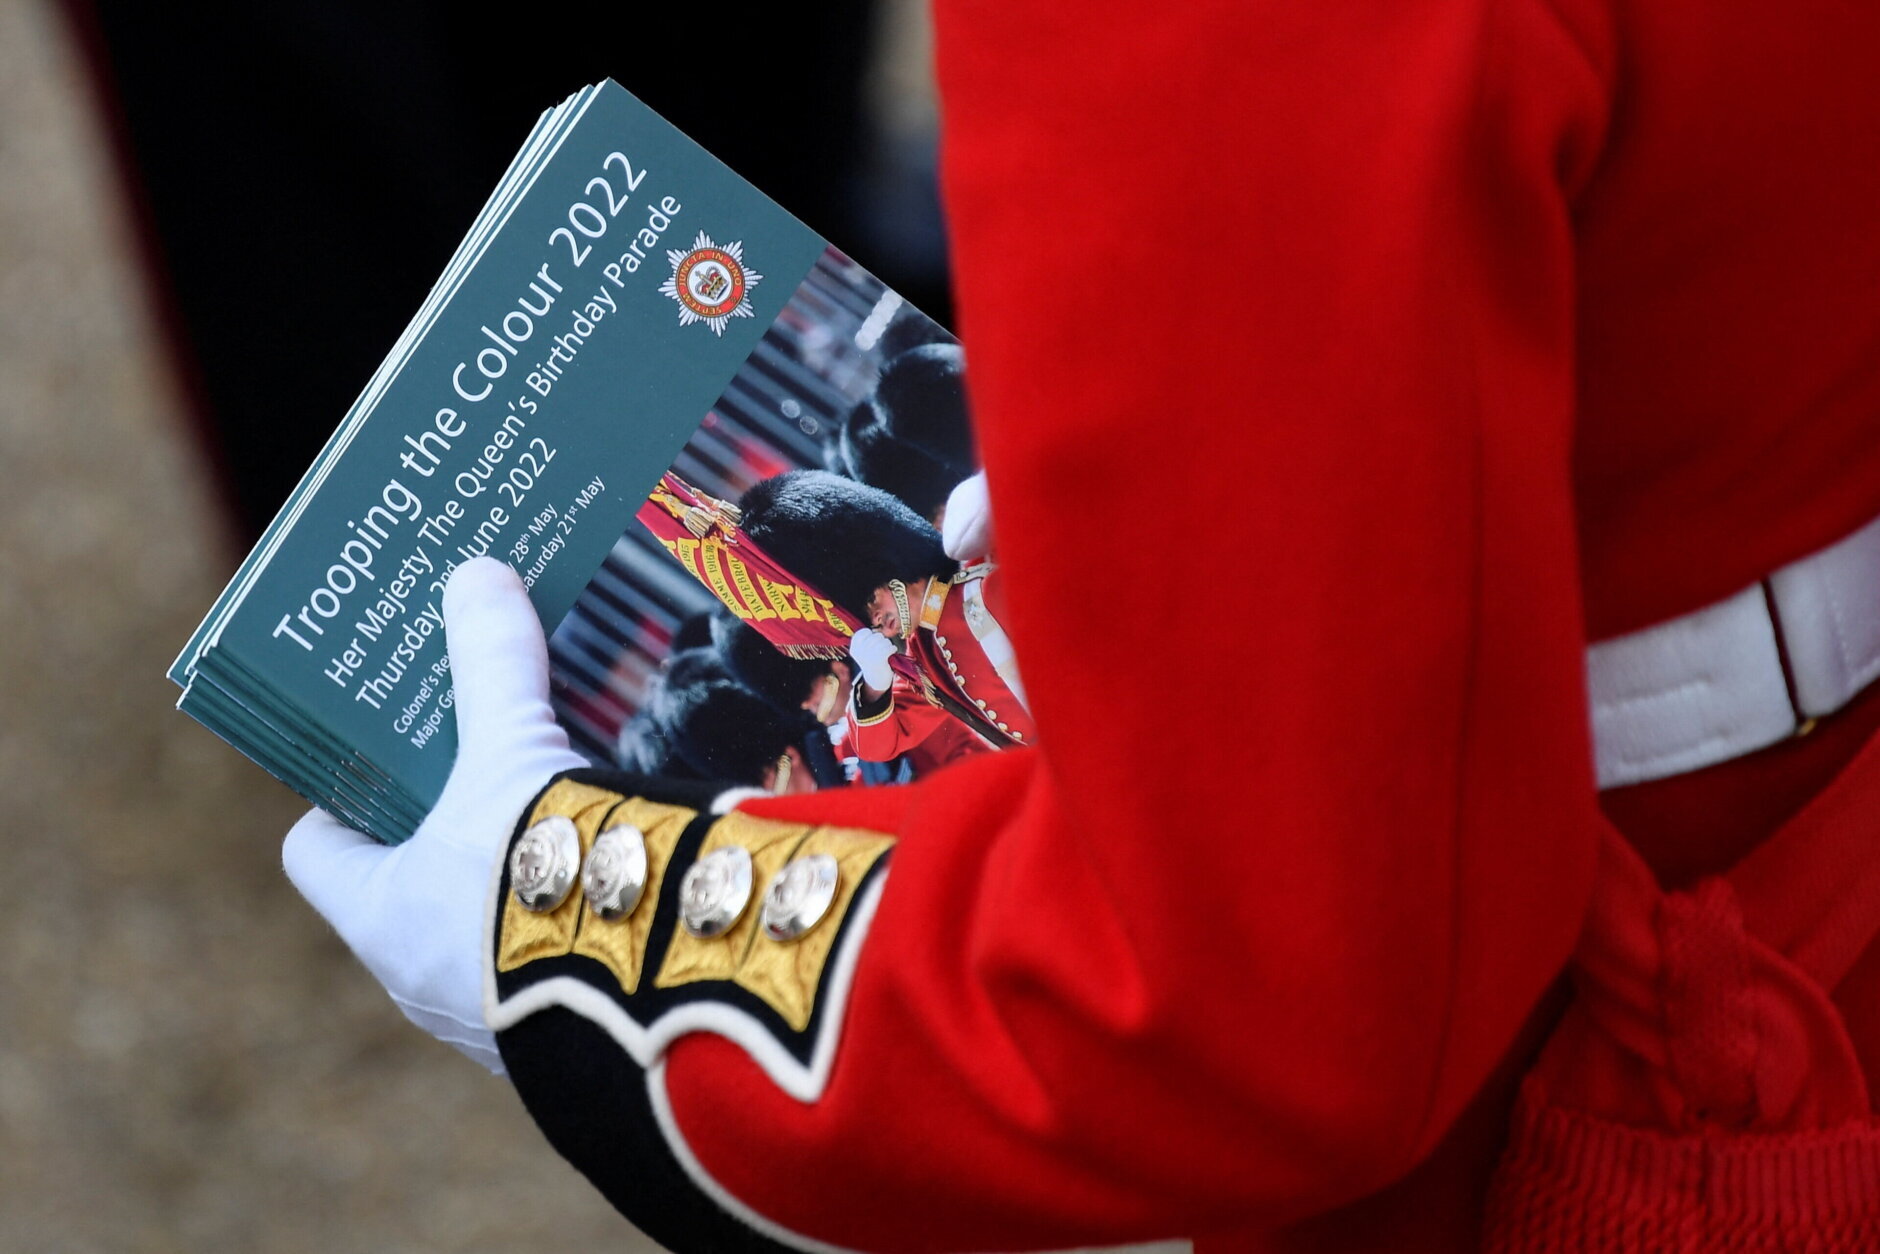 A member of the Coldstream Guards holds souvenir programs during Trooping The Colour on June 2, 2022 in London, England